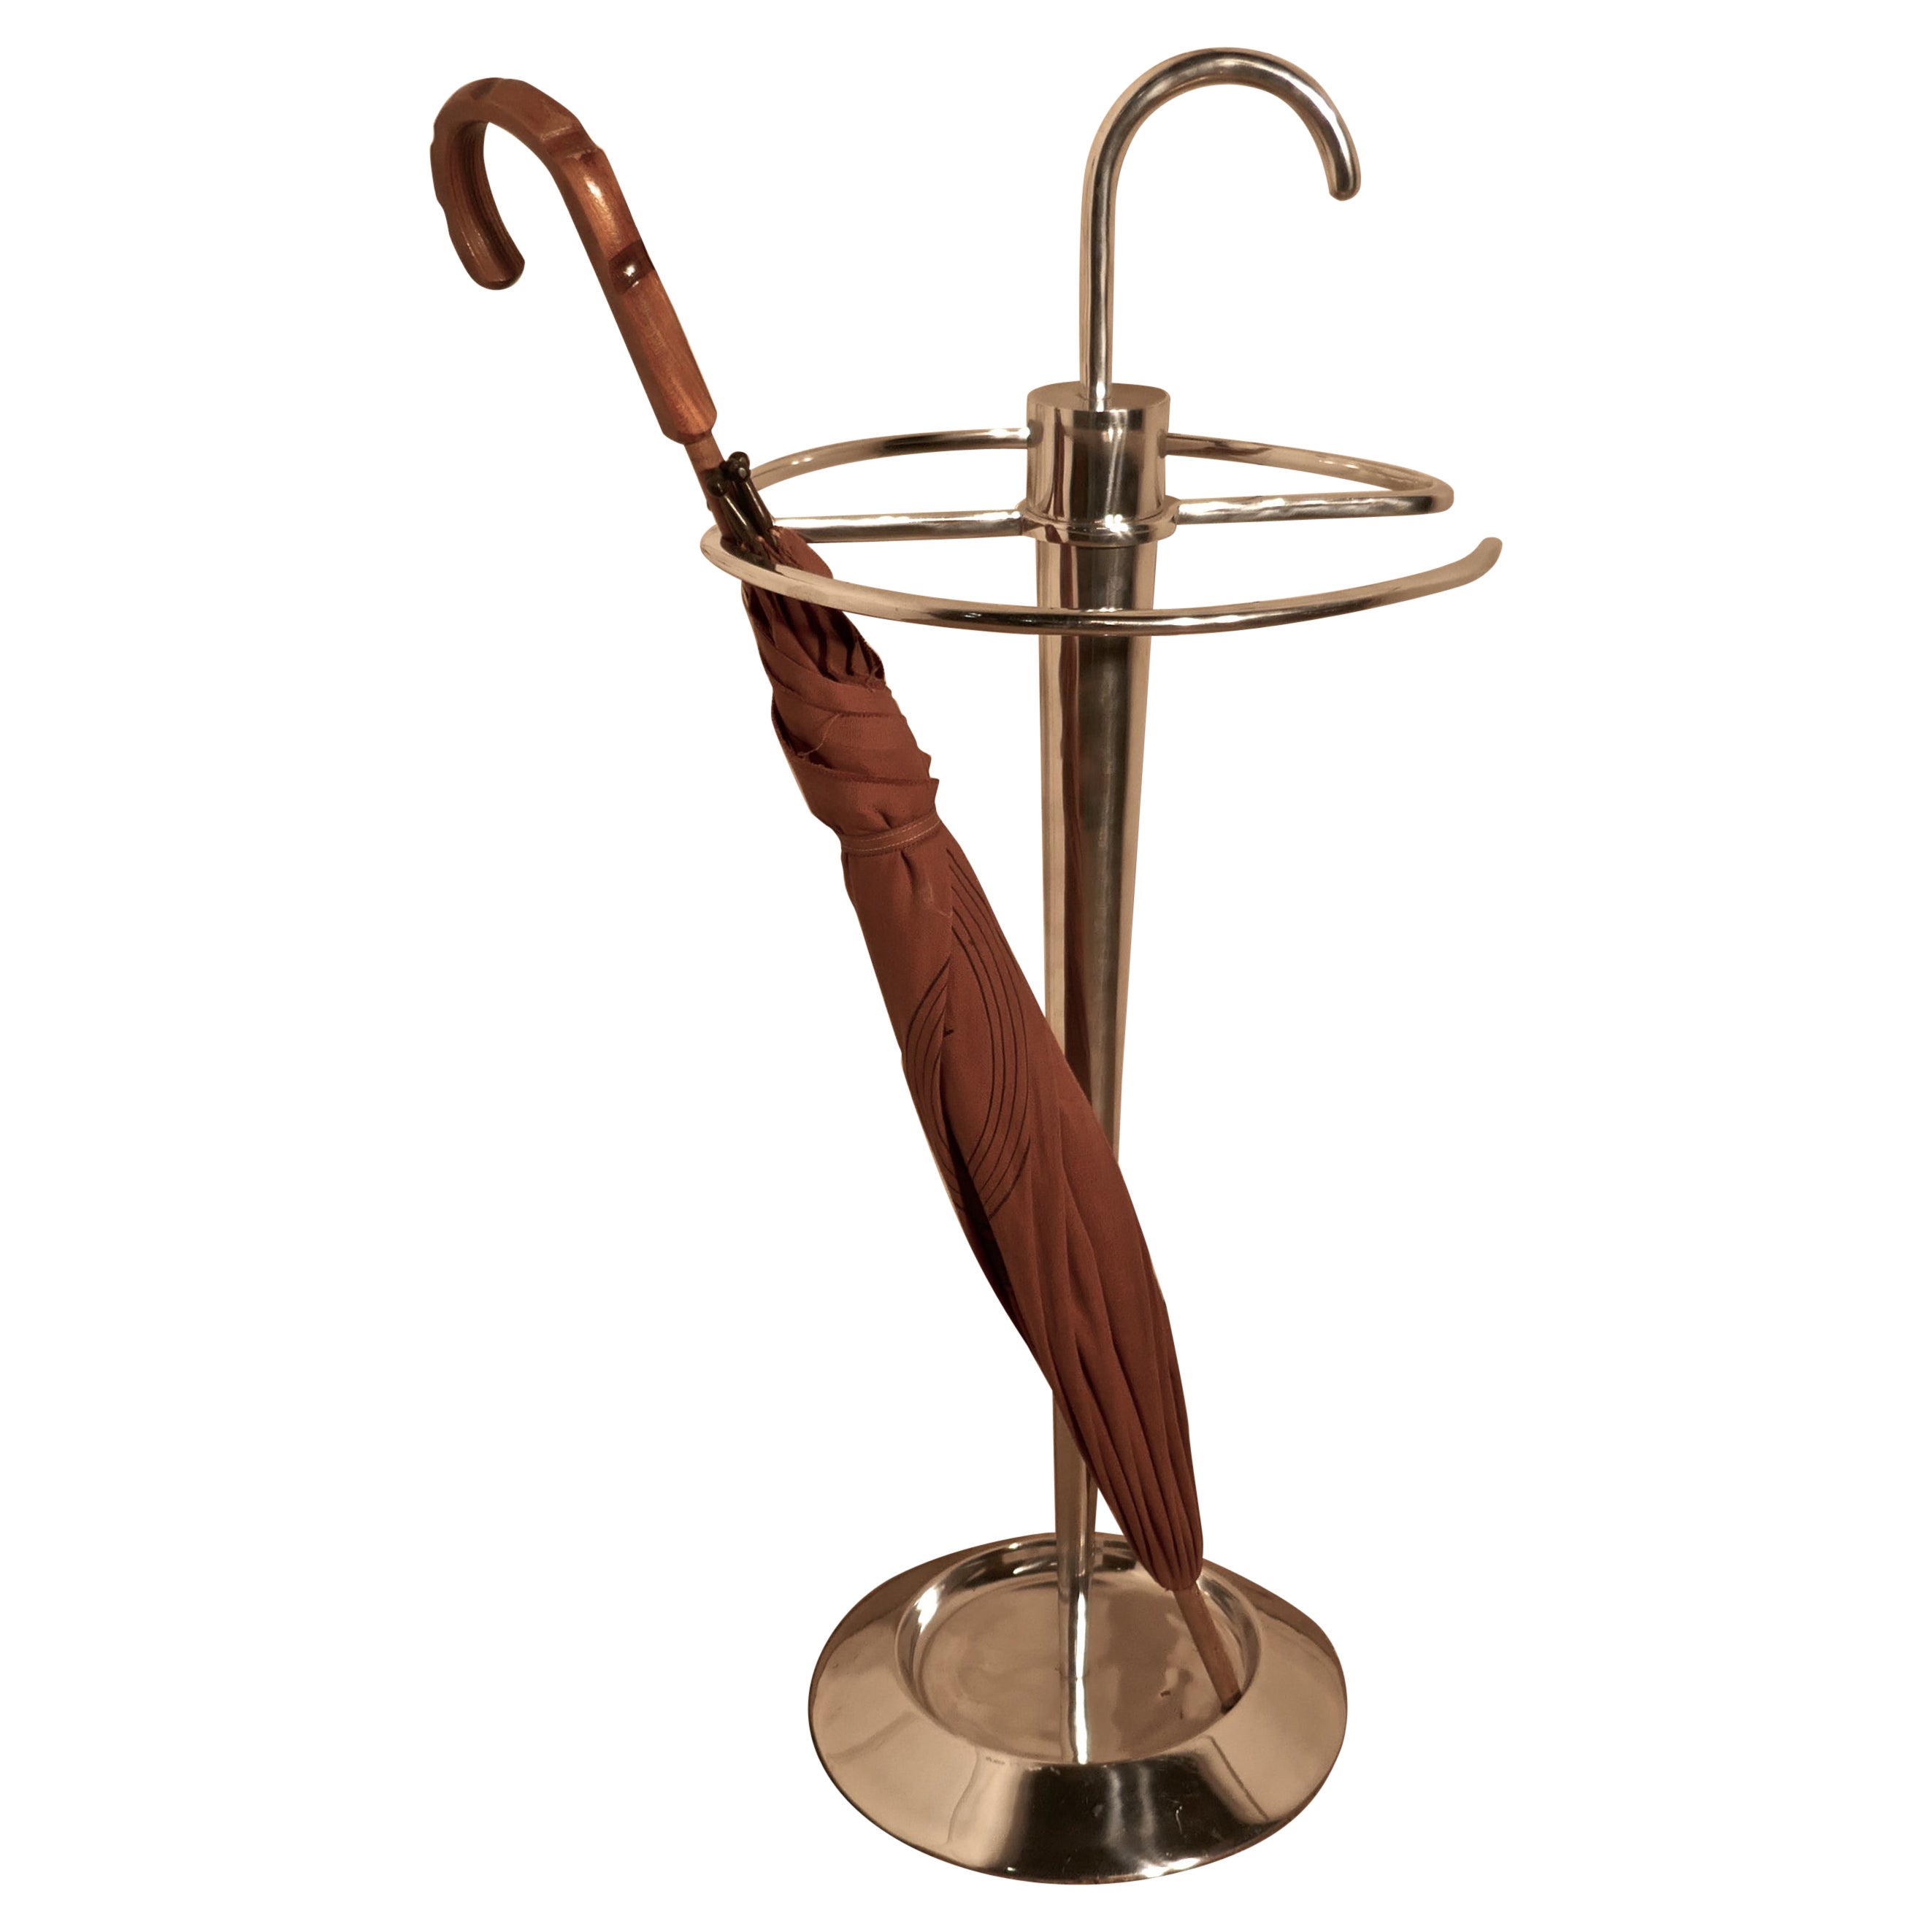 Quirky and Stylish Art Deco Chrome Umbrella or Stick Stand